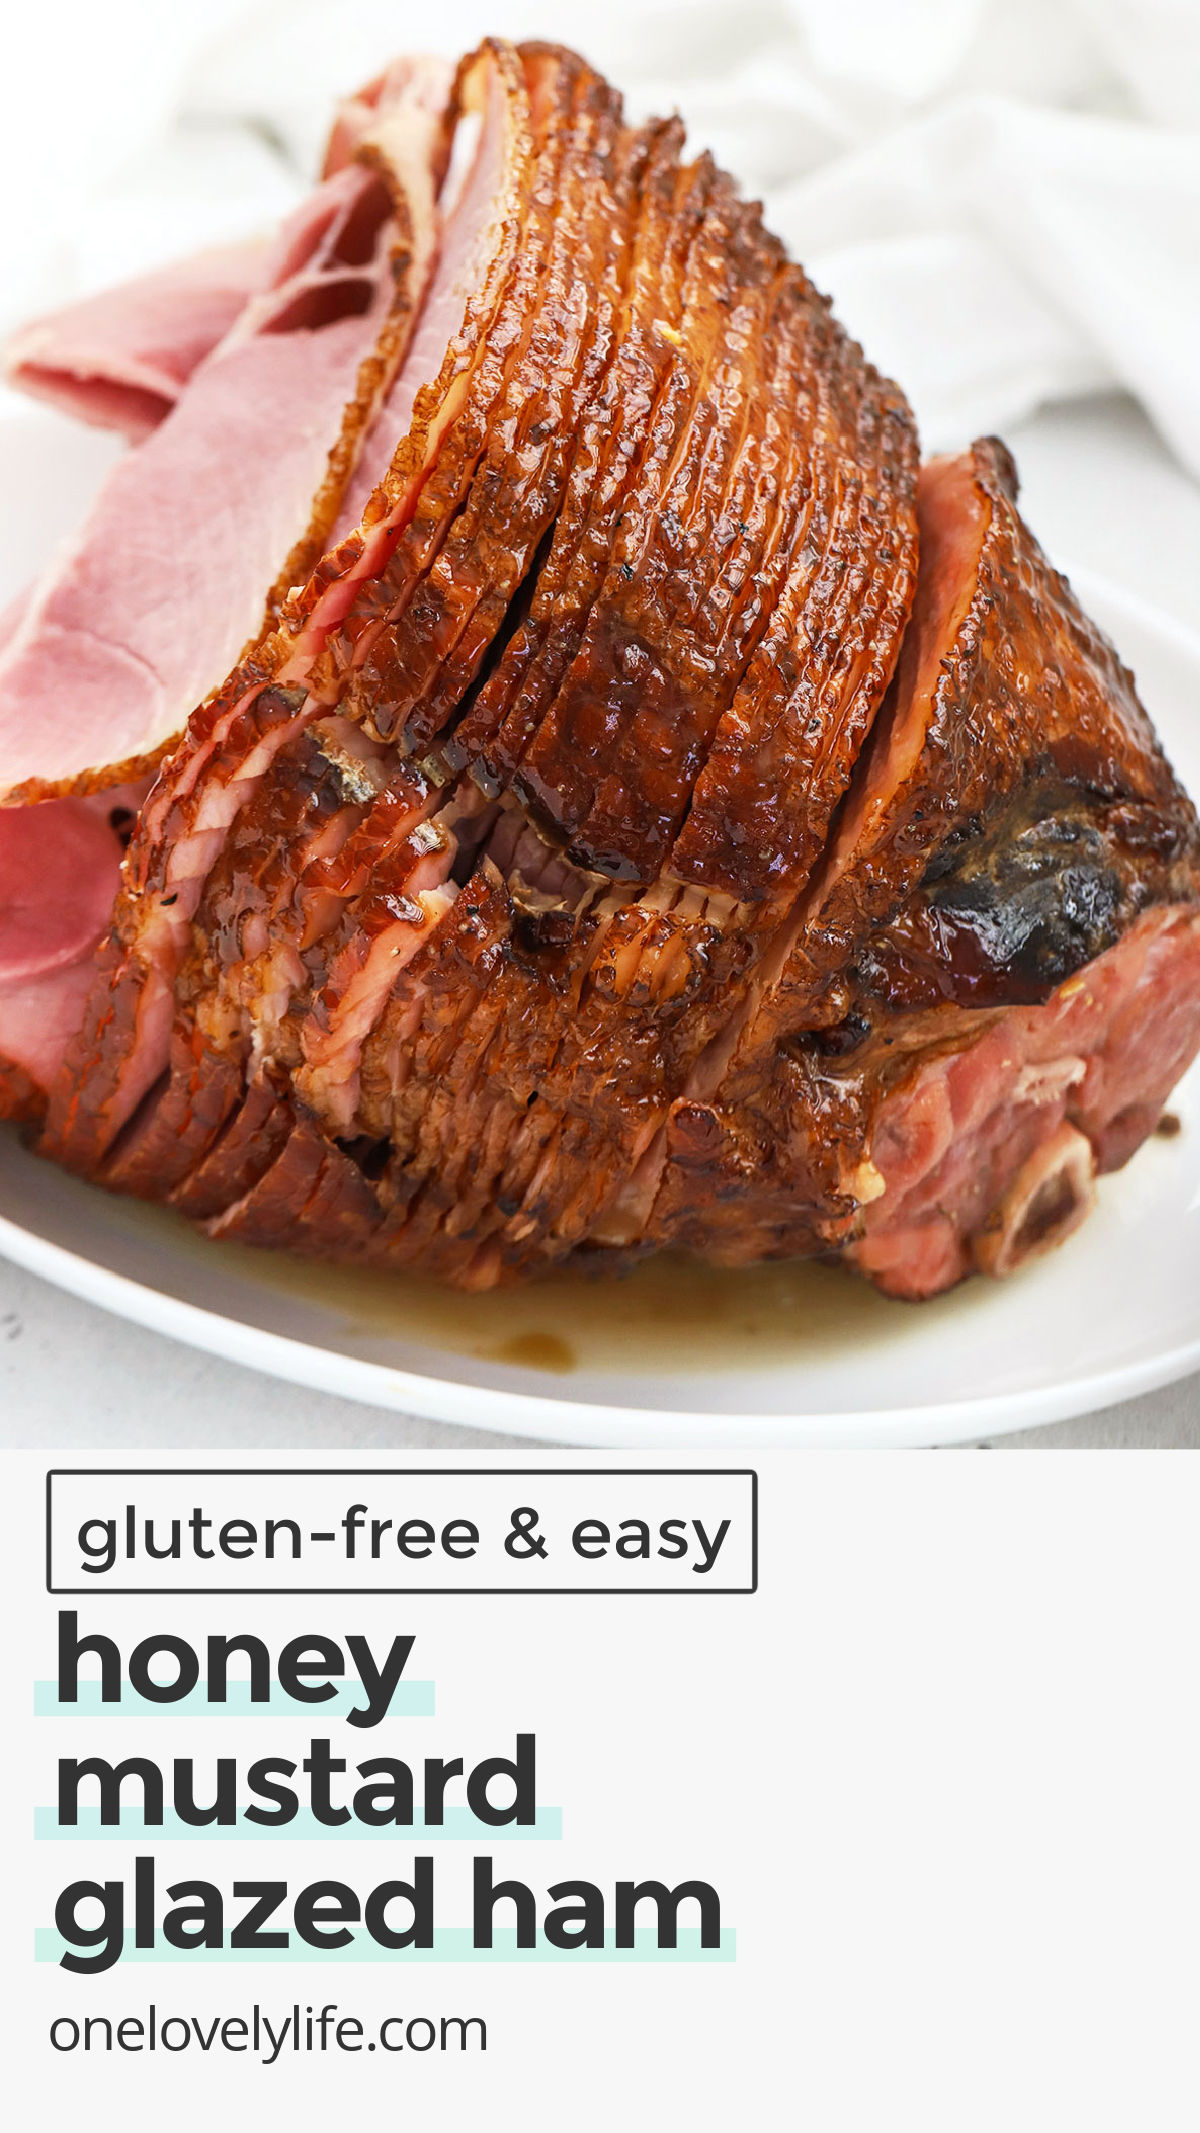 Spiral Ham With Honey Mustard Ham Glaze - This easy ham glaze recipe is made with honey, Dijon mustard, and brown sugar. It's sweet, tangy, and delicious! / honey mustard glazed ham / gluten-free ham glaze / gluten free glazed ham / gluten free glaze for ham / gluten-free easter recipe / gluten free thanksgiving recipe / gluten-free ham recipe / honey brown sugar ham glaze / the best glazed ham / ham glaze without spices / ham glaze no spices / ham glaze with mustard / ham glaze with honey